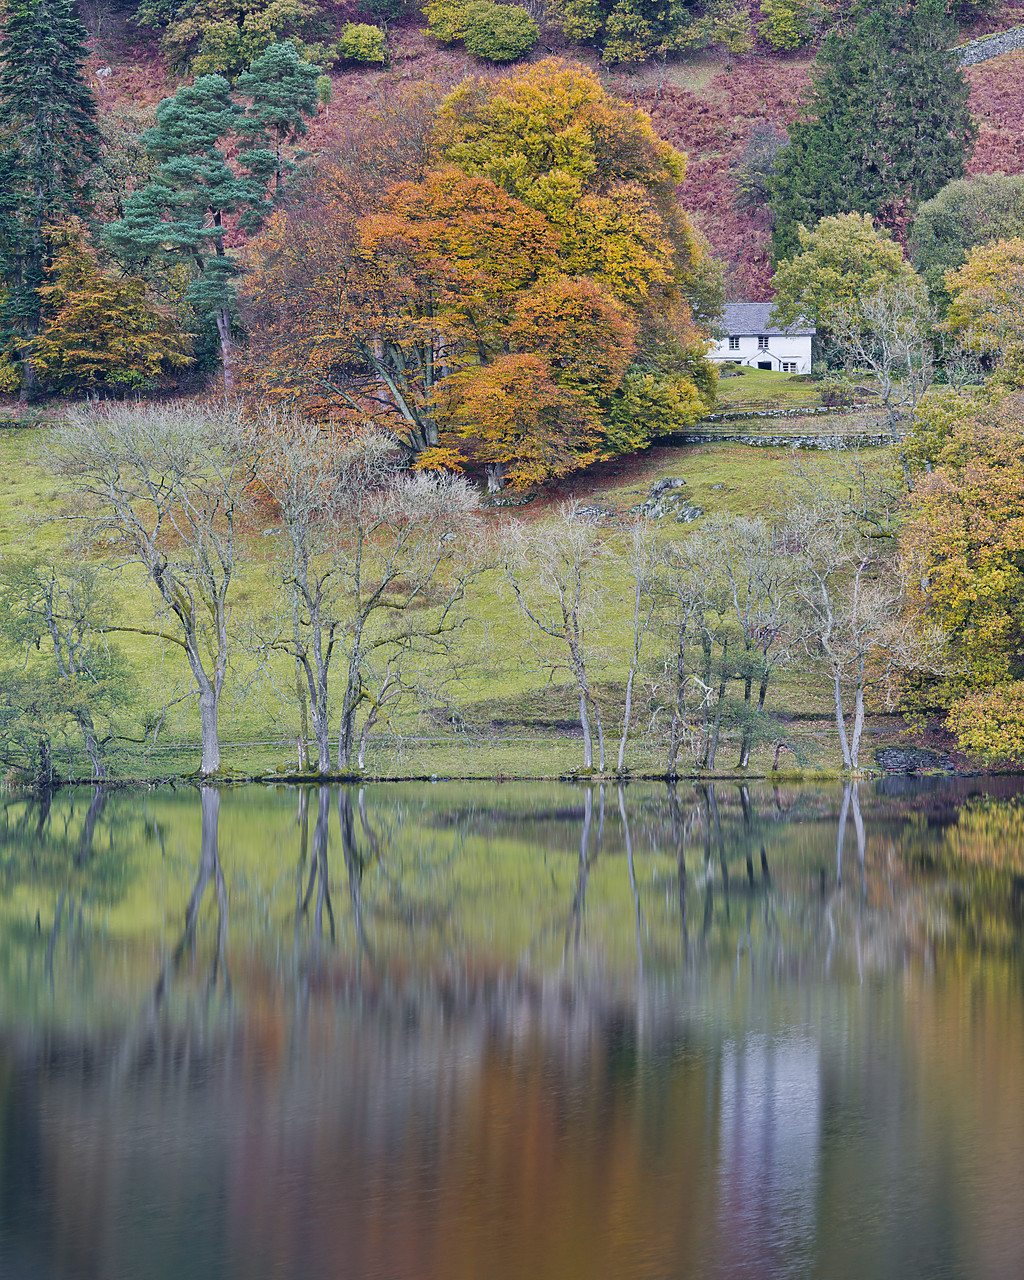 #130394-2 - Cottage Reflecting in Loughrigg Tarn in Autumn, Lake District National Park, Cumbria, England